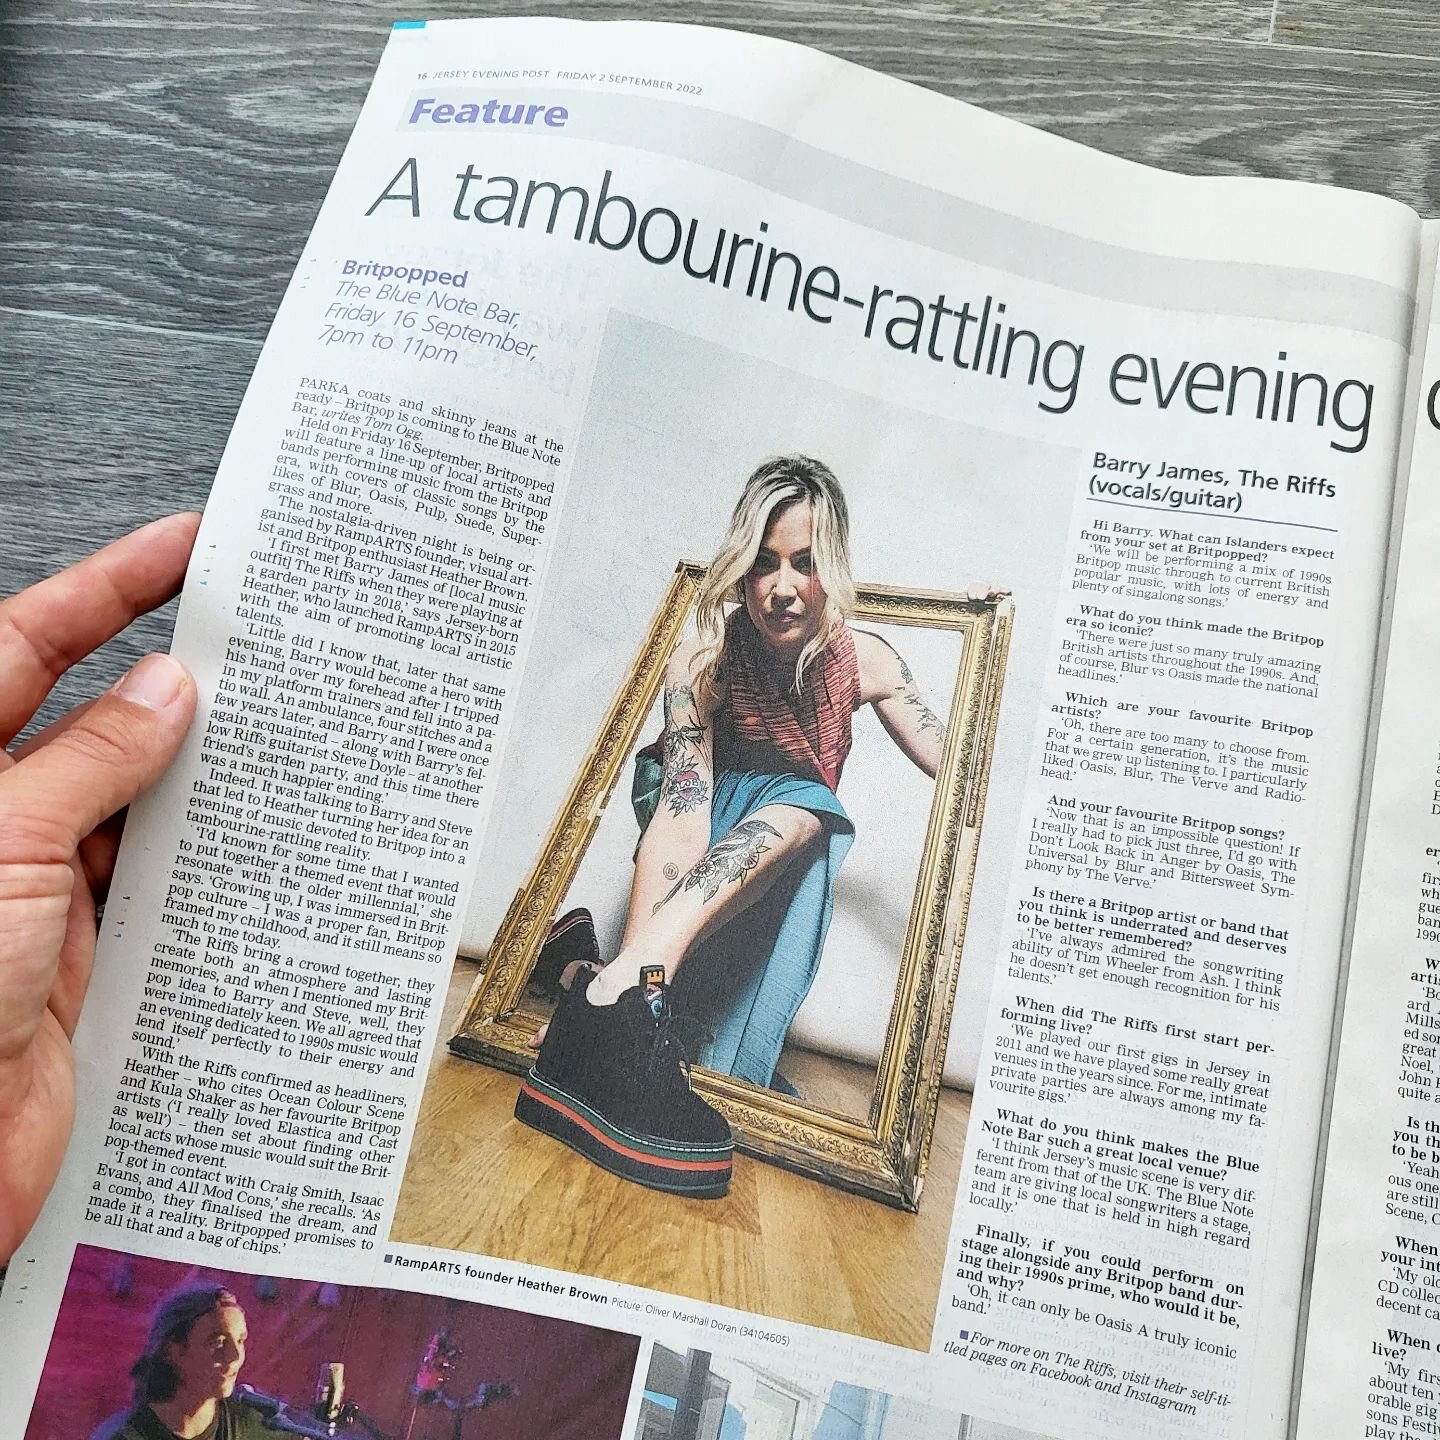 Booyah!

Thank you @jepnews for this hella two page spread in today's paper, celebrating our Britpopped event at @bluenotejsy on Friday 16th September 🎶

It promises to be all that and a bag of chips!!!

@theriffsjersey
@isaac.music 
@craigsmith0190